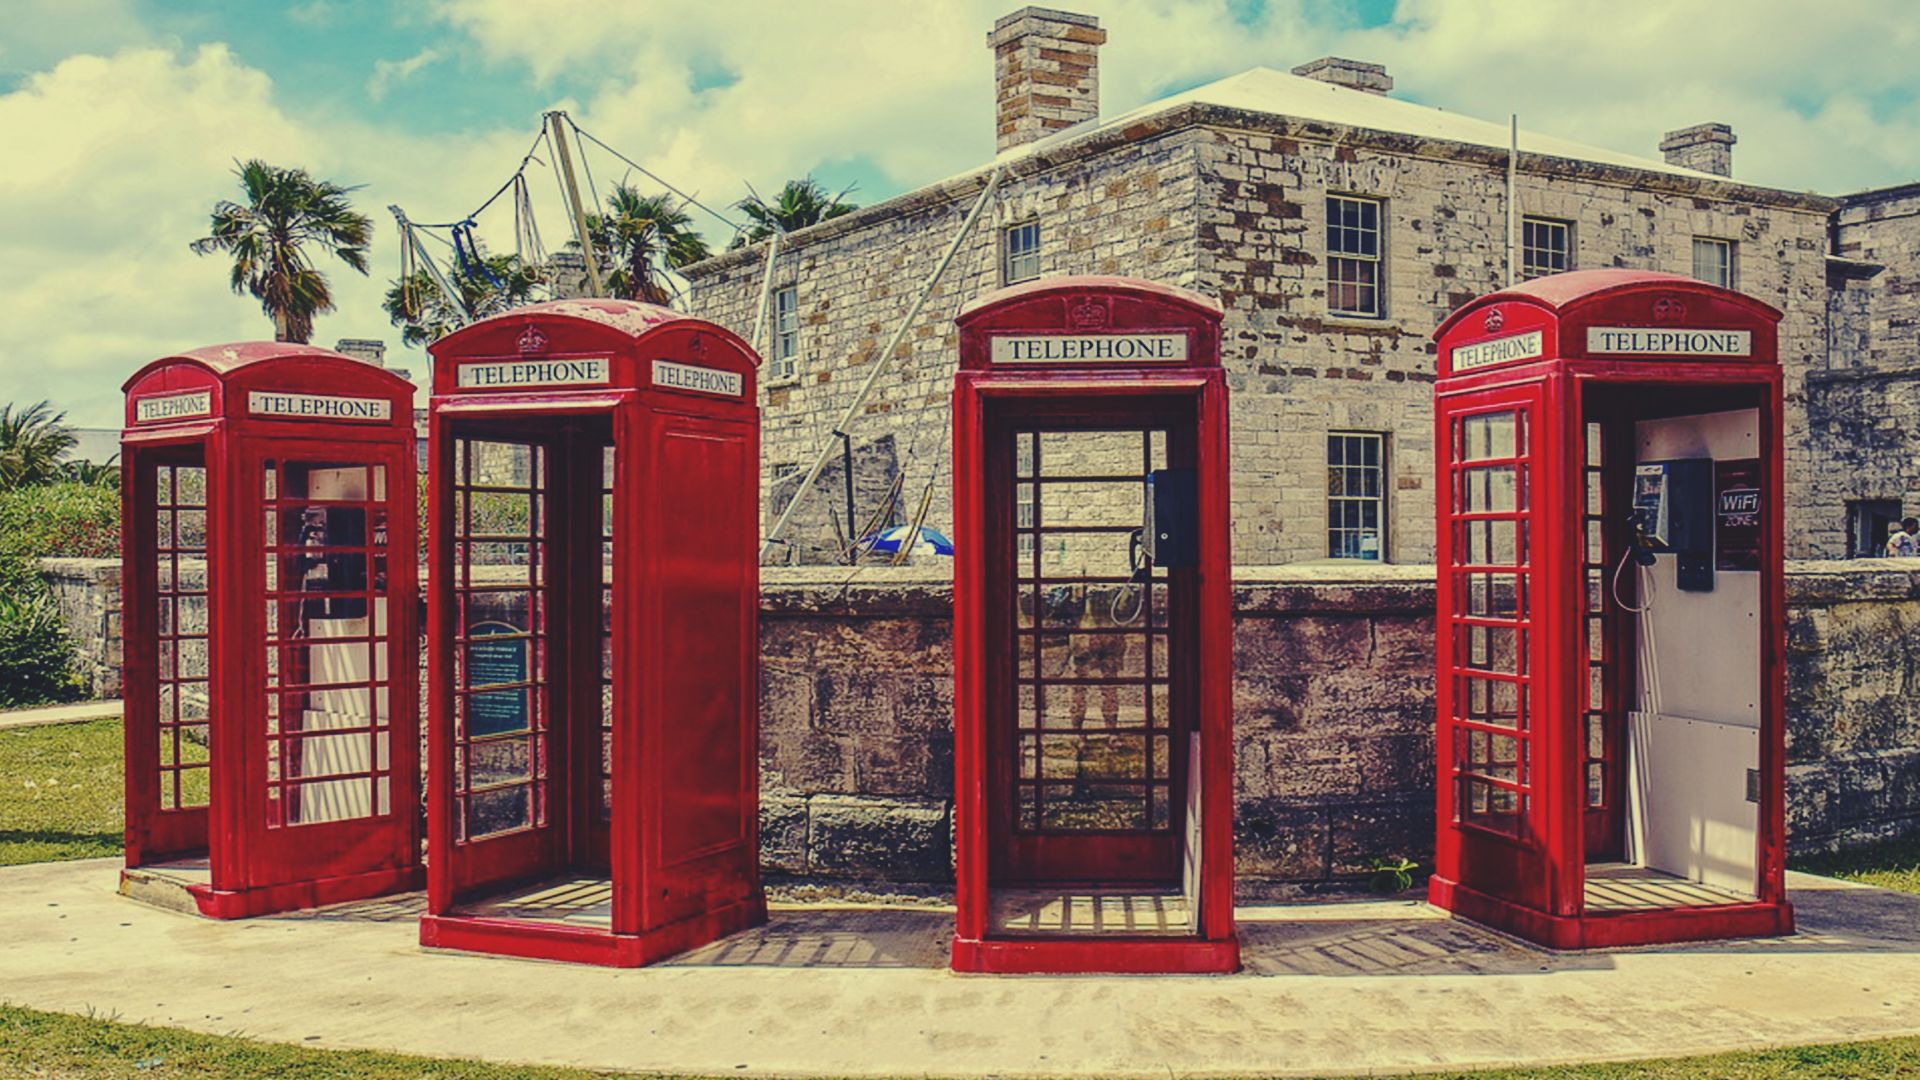 photography, vintage, telephone booth, telephone